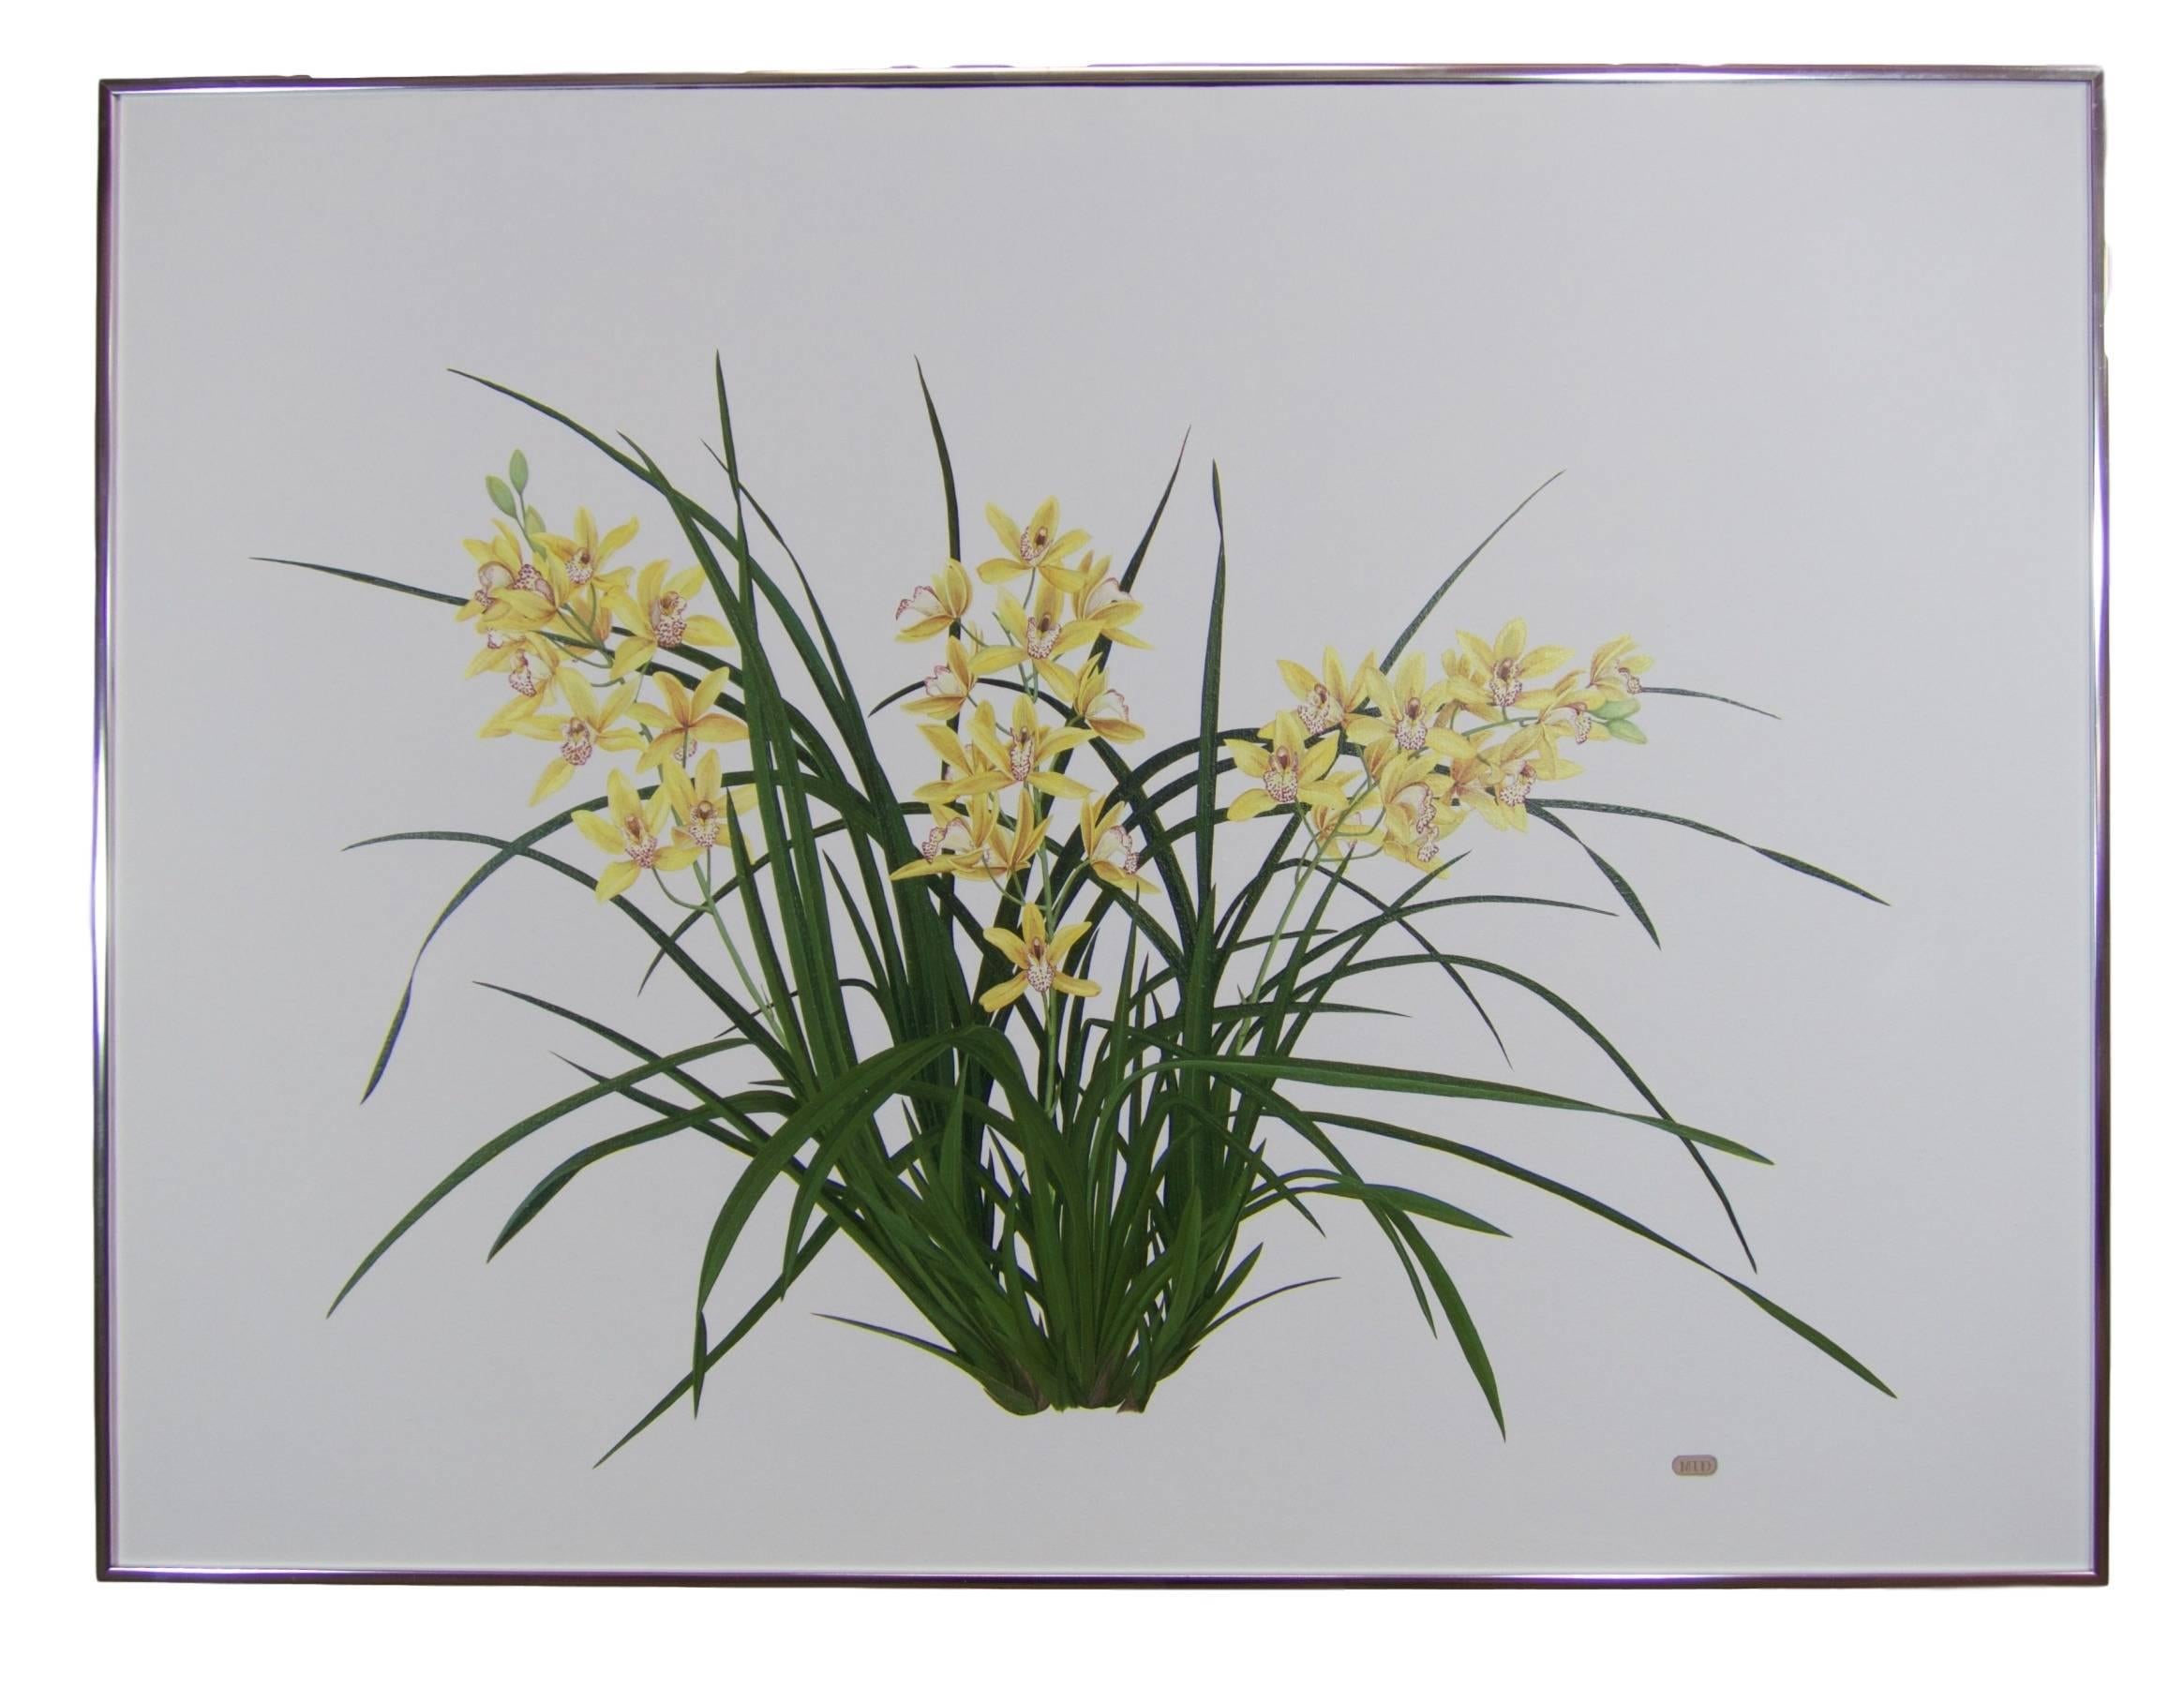 Large hyperrealist botanical of an orchid plant - I - Painting by Marcia I. Dawson